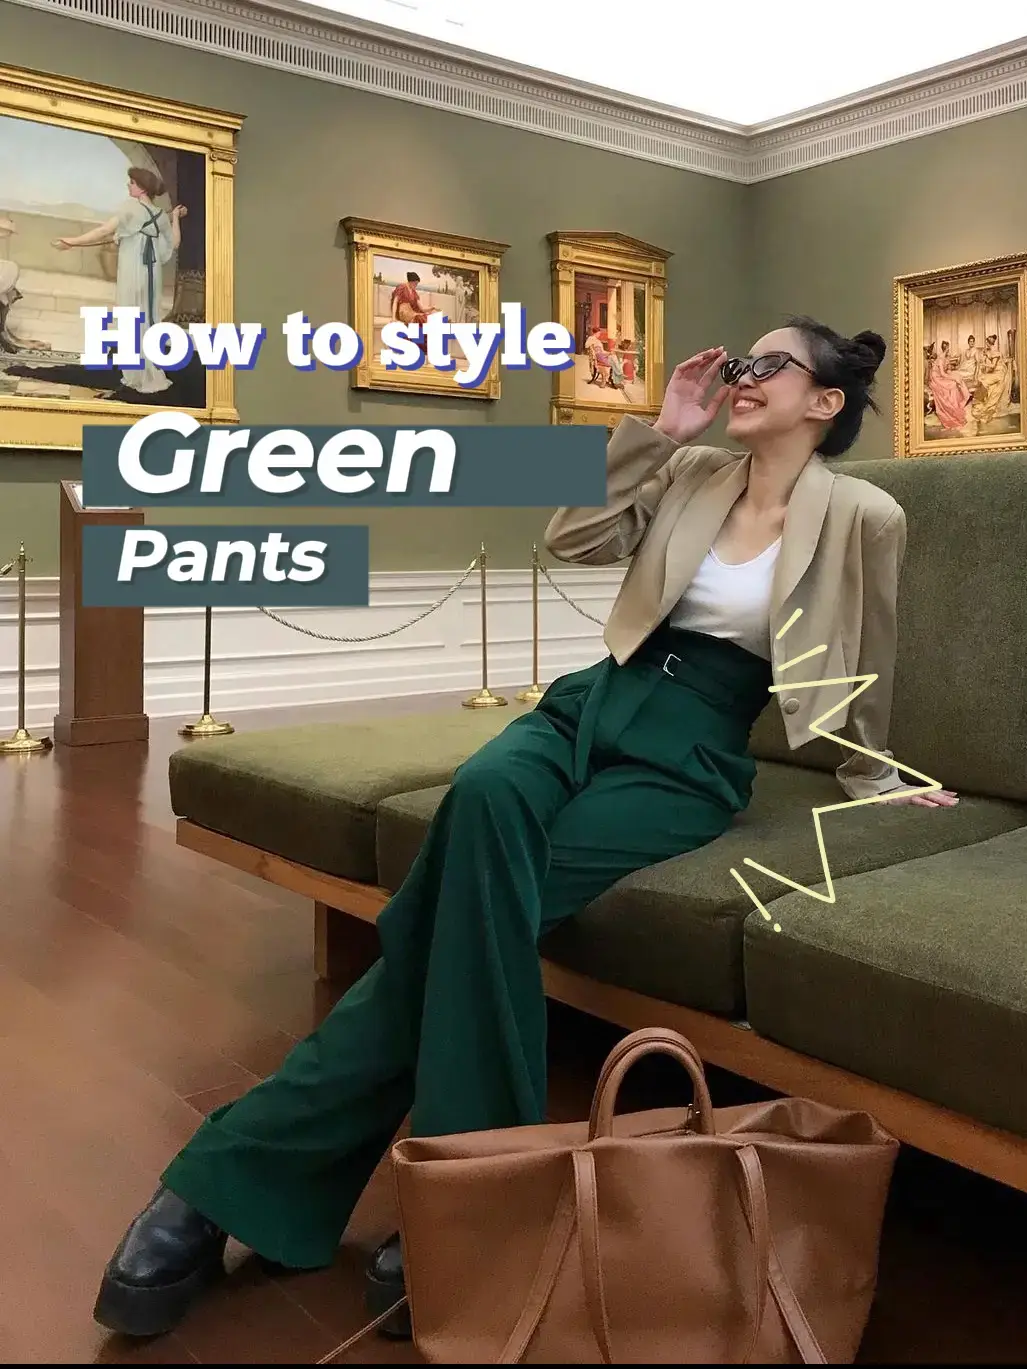 How to dress with bright green pants